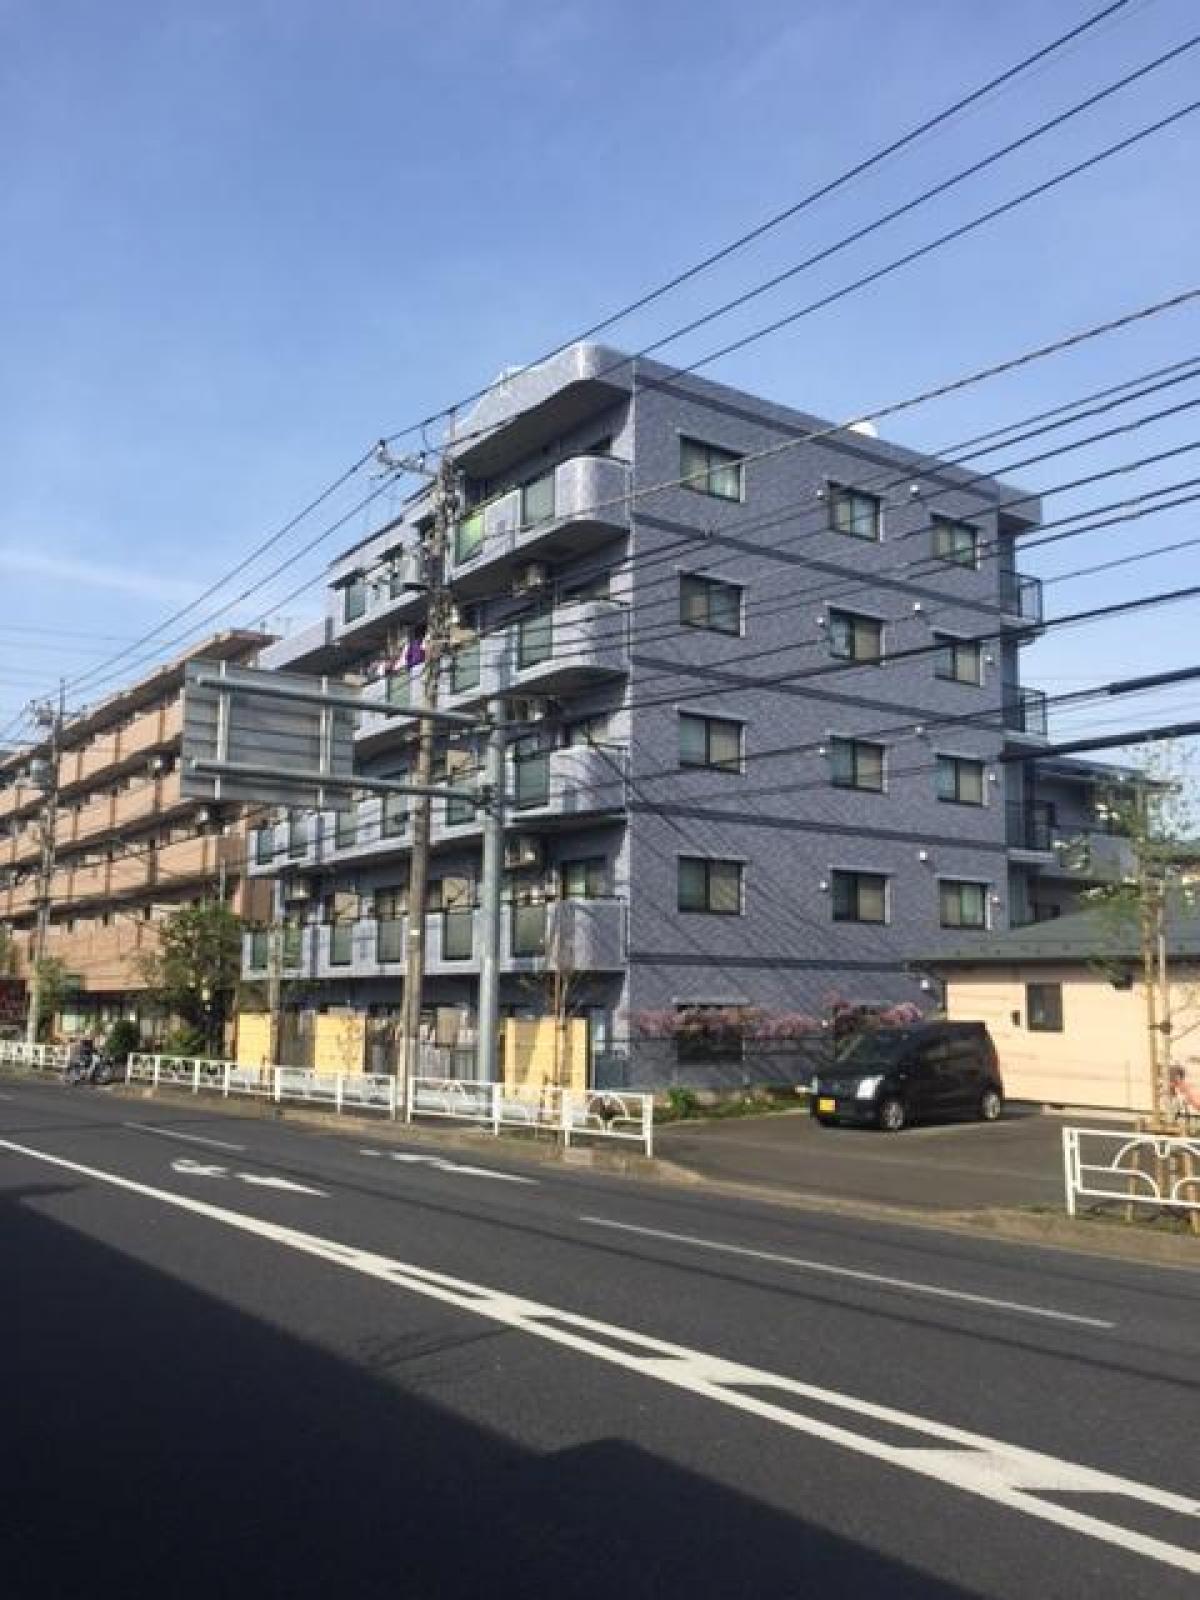 Picture of Apartment For Sale in Kodaira Shi, Tokyo, Japan